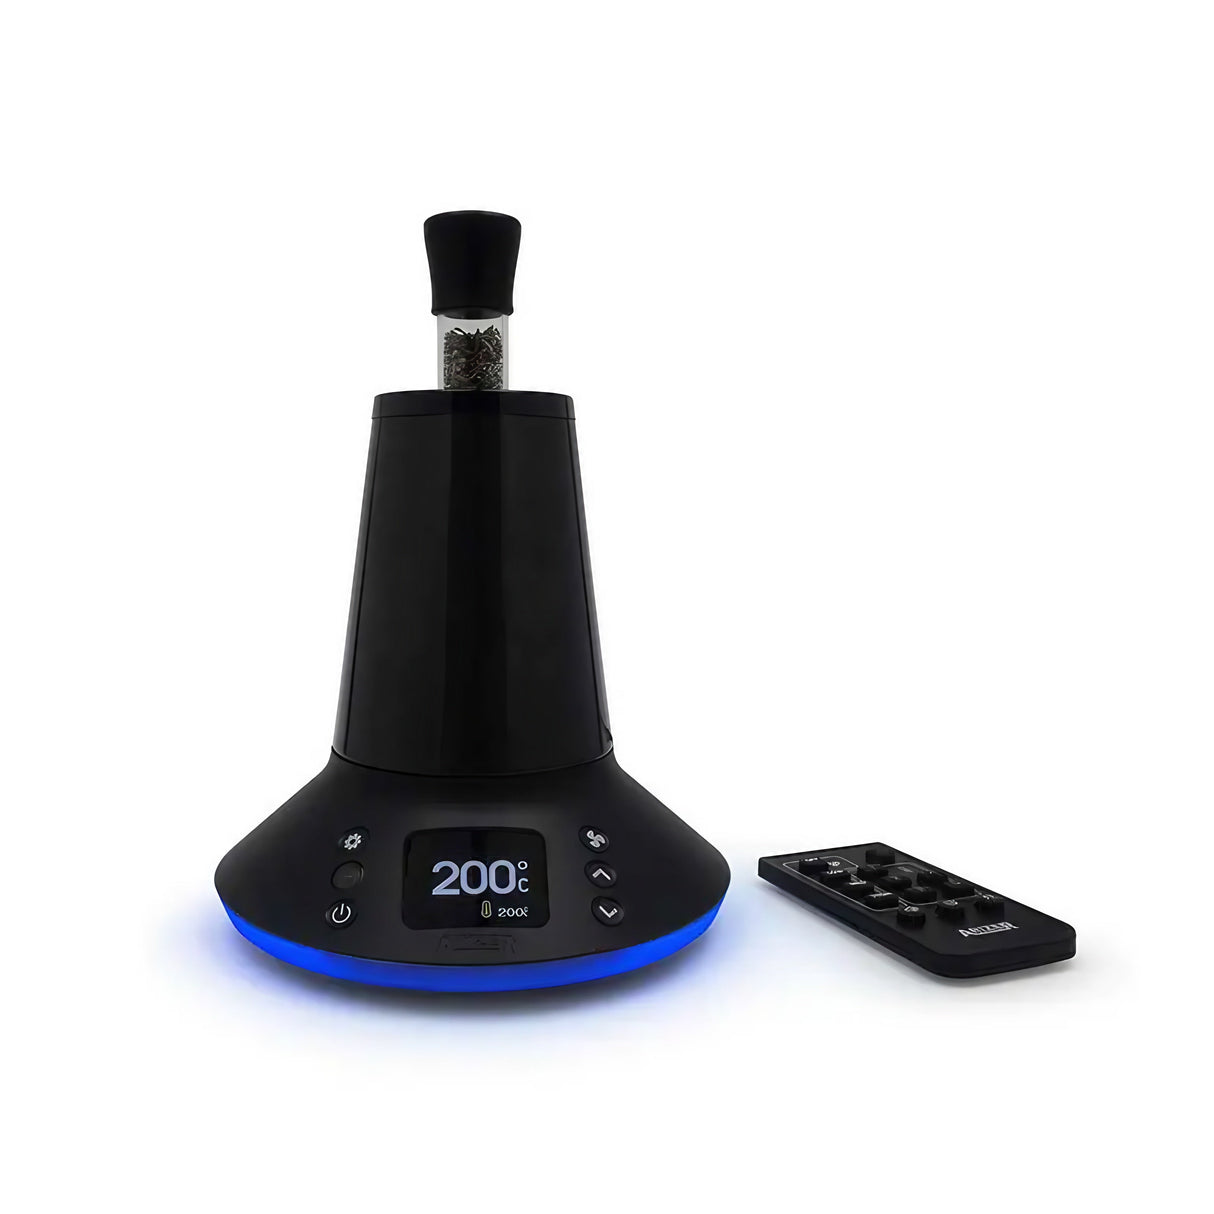 Arizer XQ2 Vaporizer front view with digital temperature display and remote control, for dry herbs